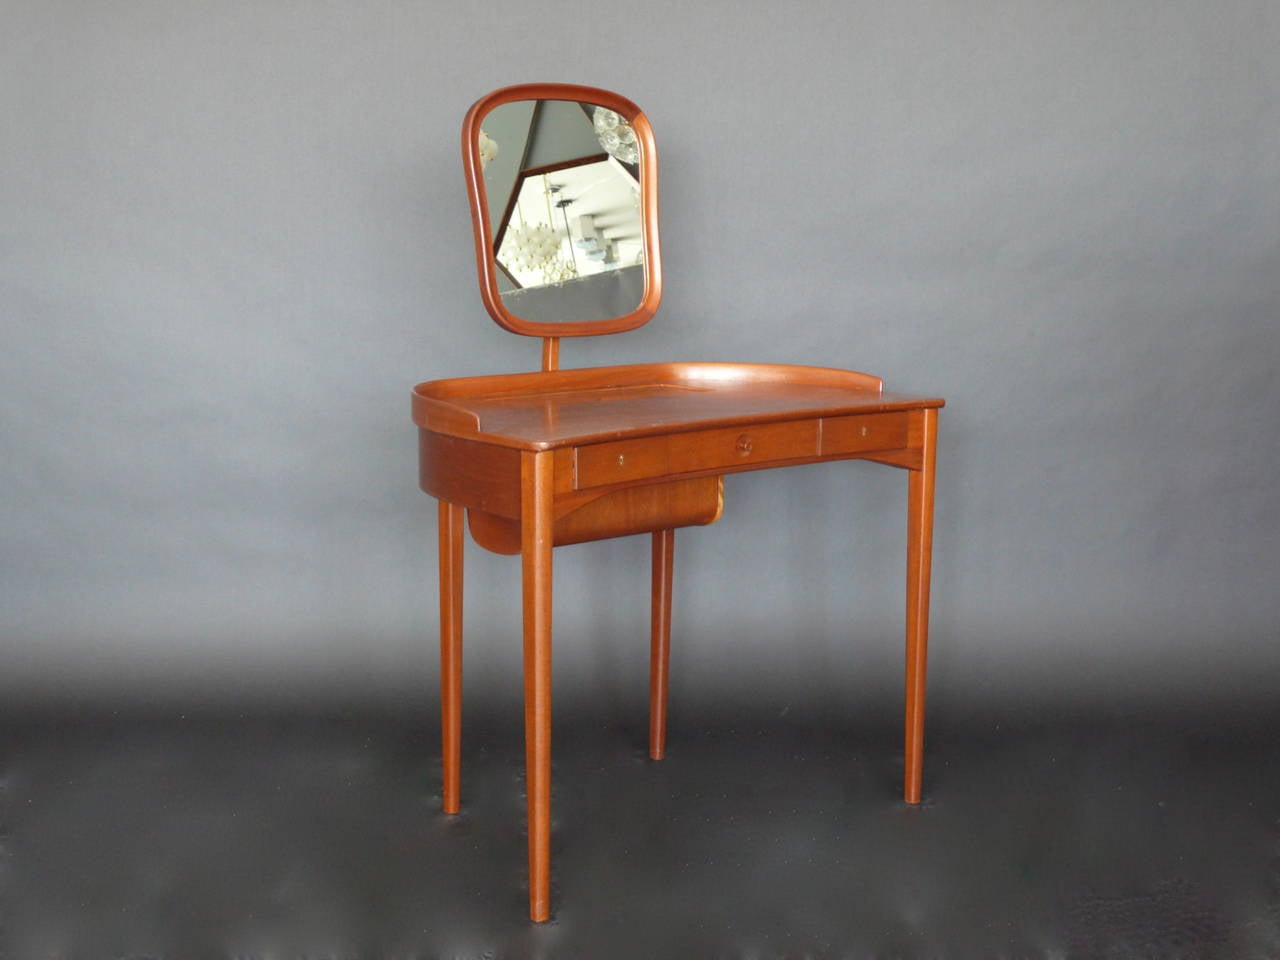 Handsome German vanity made of mahogany. Adjustable mirror and hidden drawer. Three additional drawers complete with original locks and key. Fantastic scale and clean design. Original vintage condition.